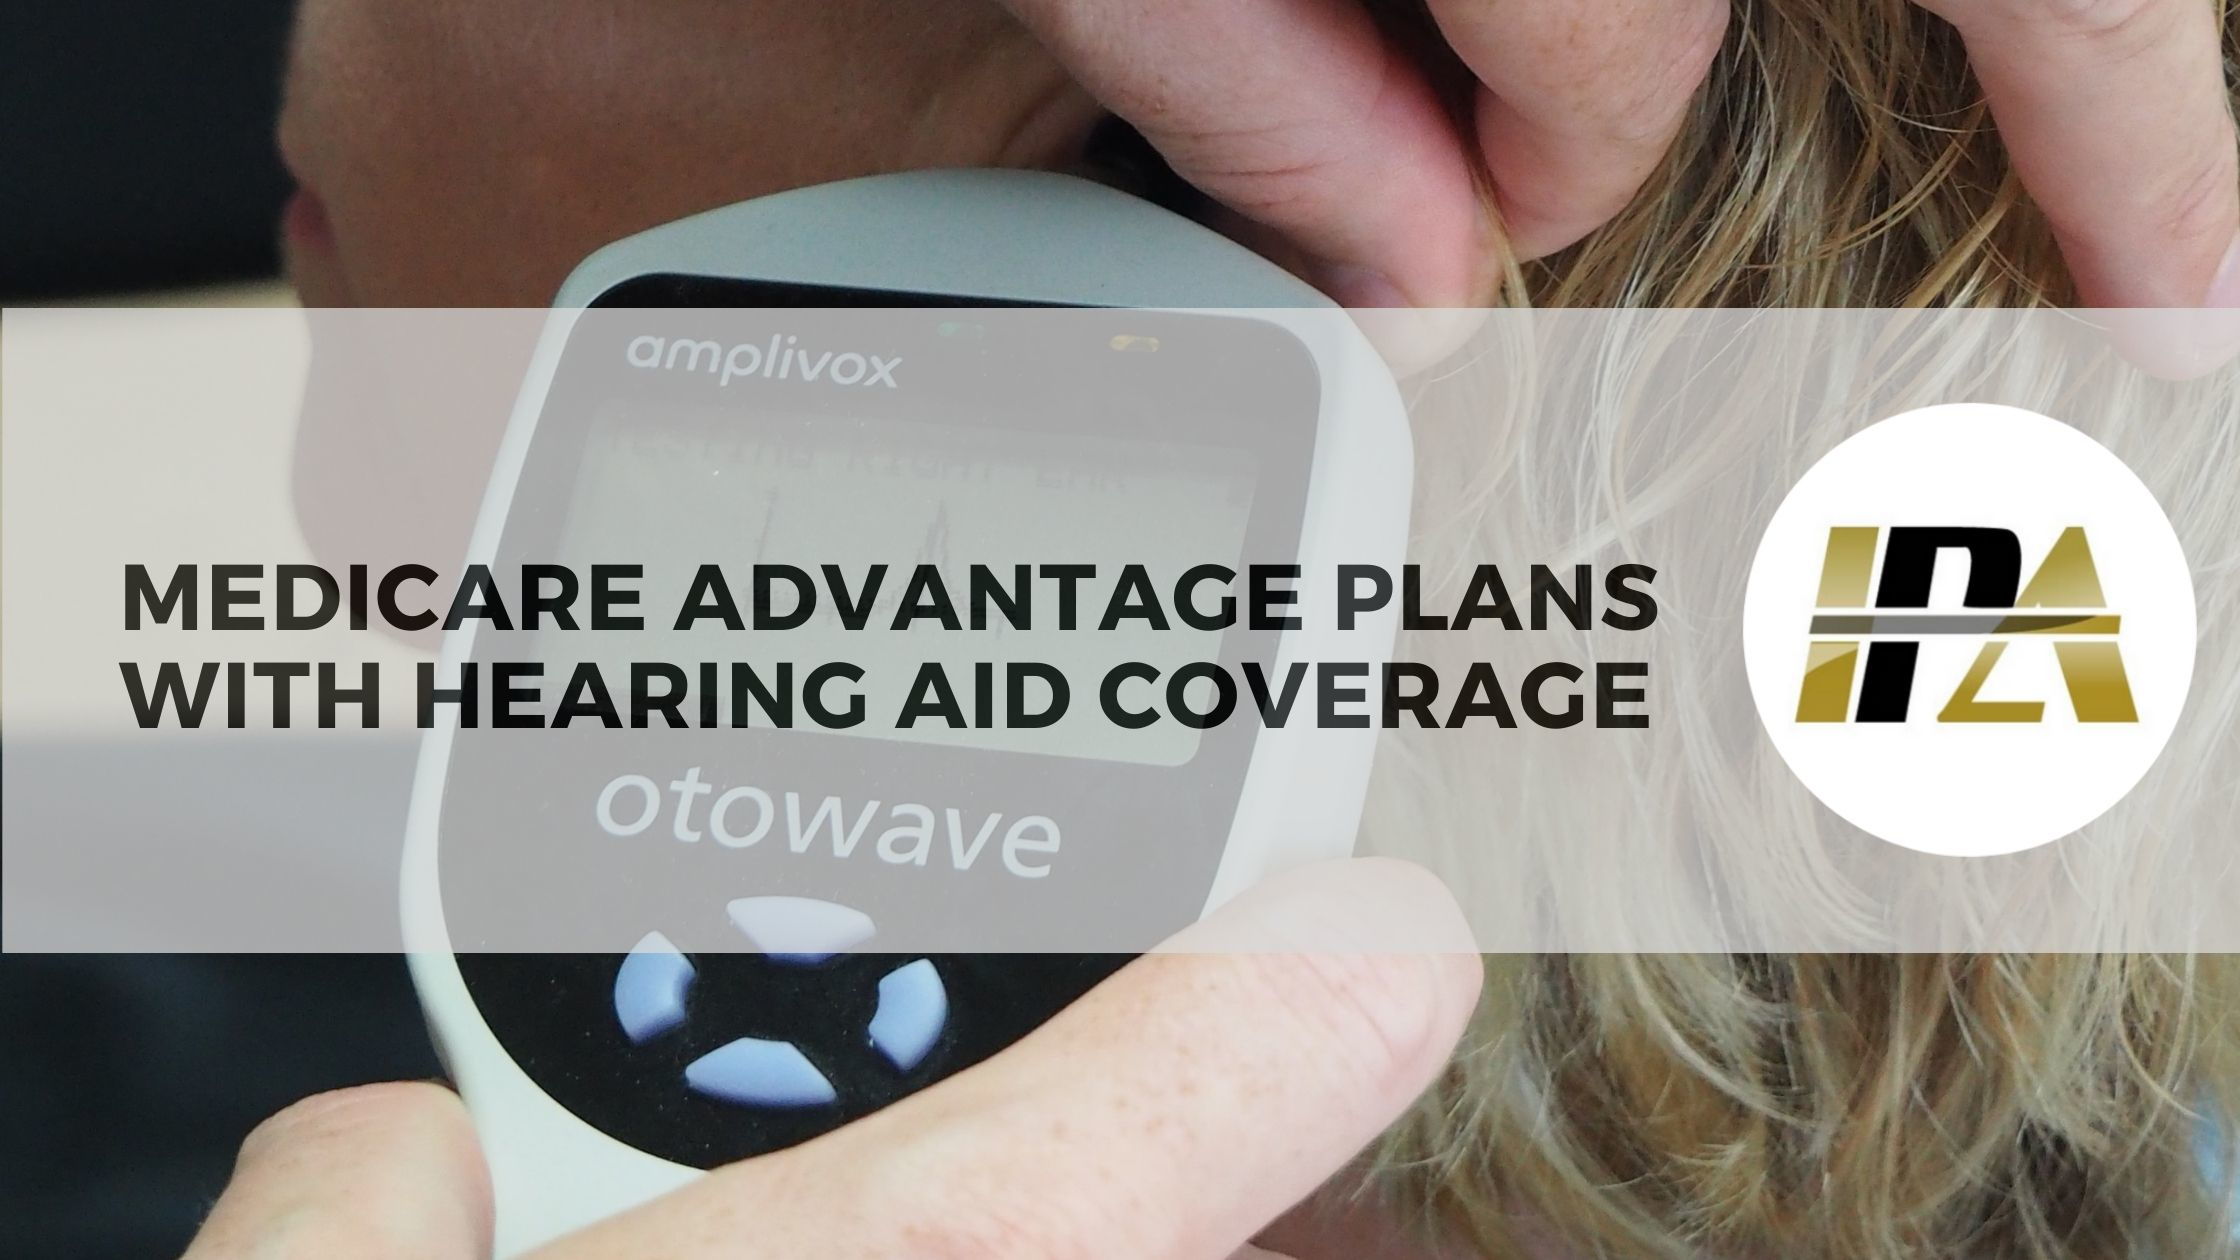 Medicare Advantage Plans With Hearing Aid Coverage